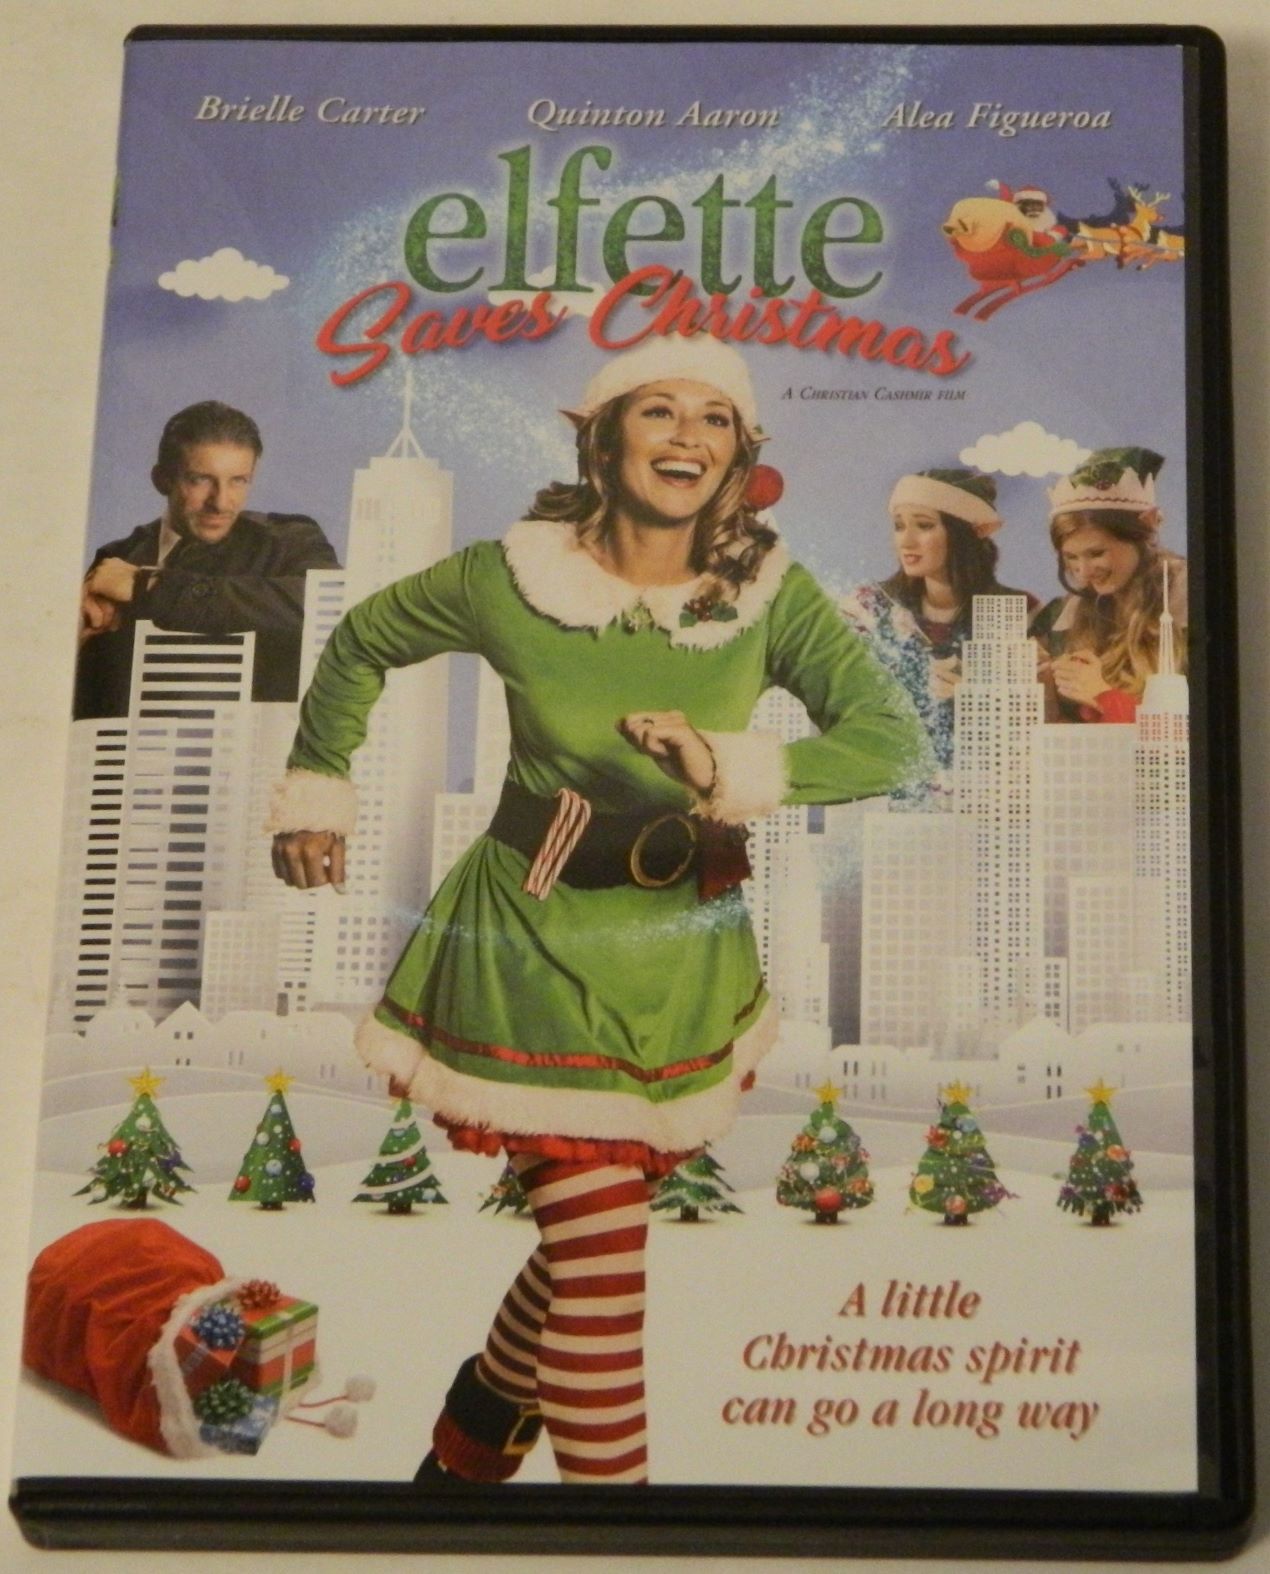 Elfette Saves Christmas DVD Review